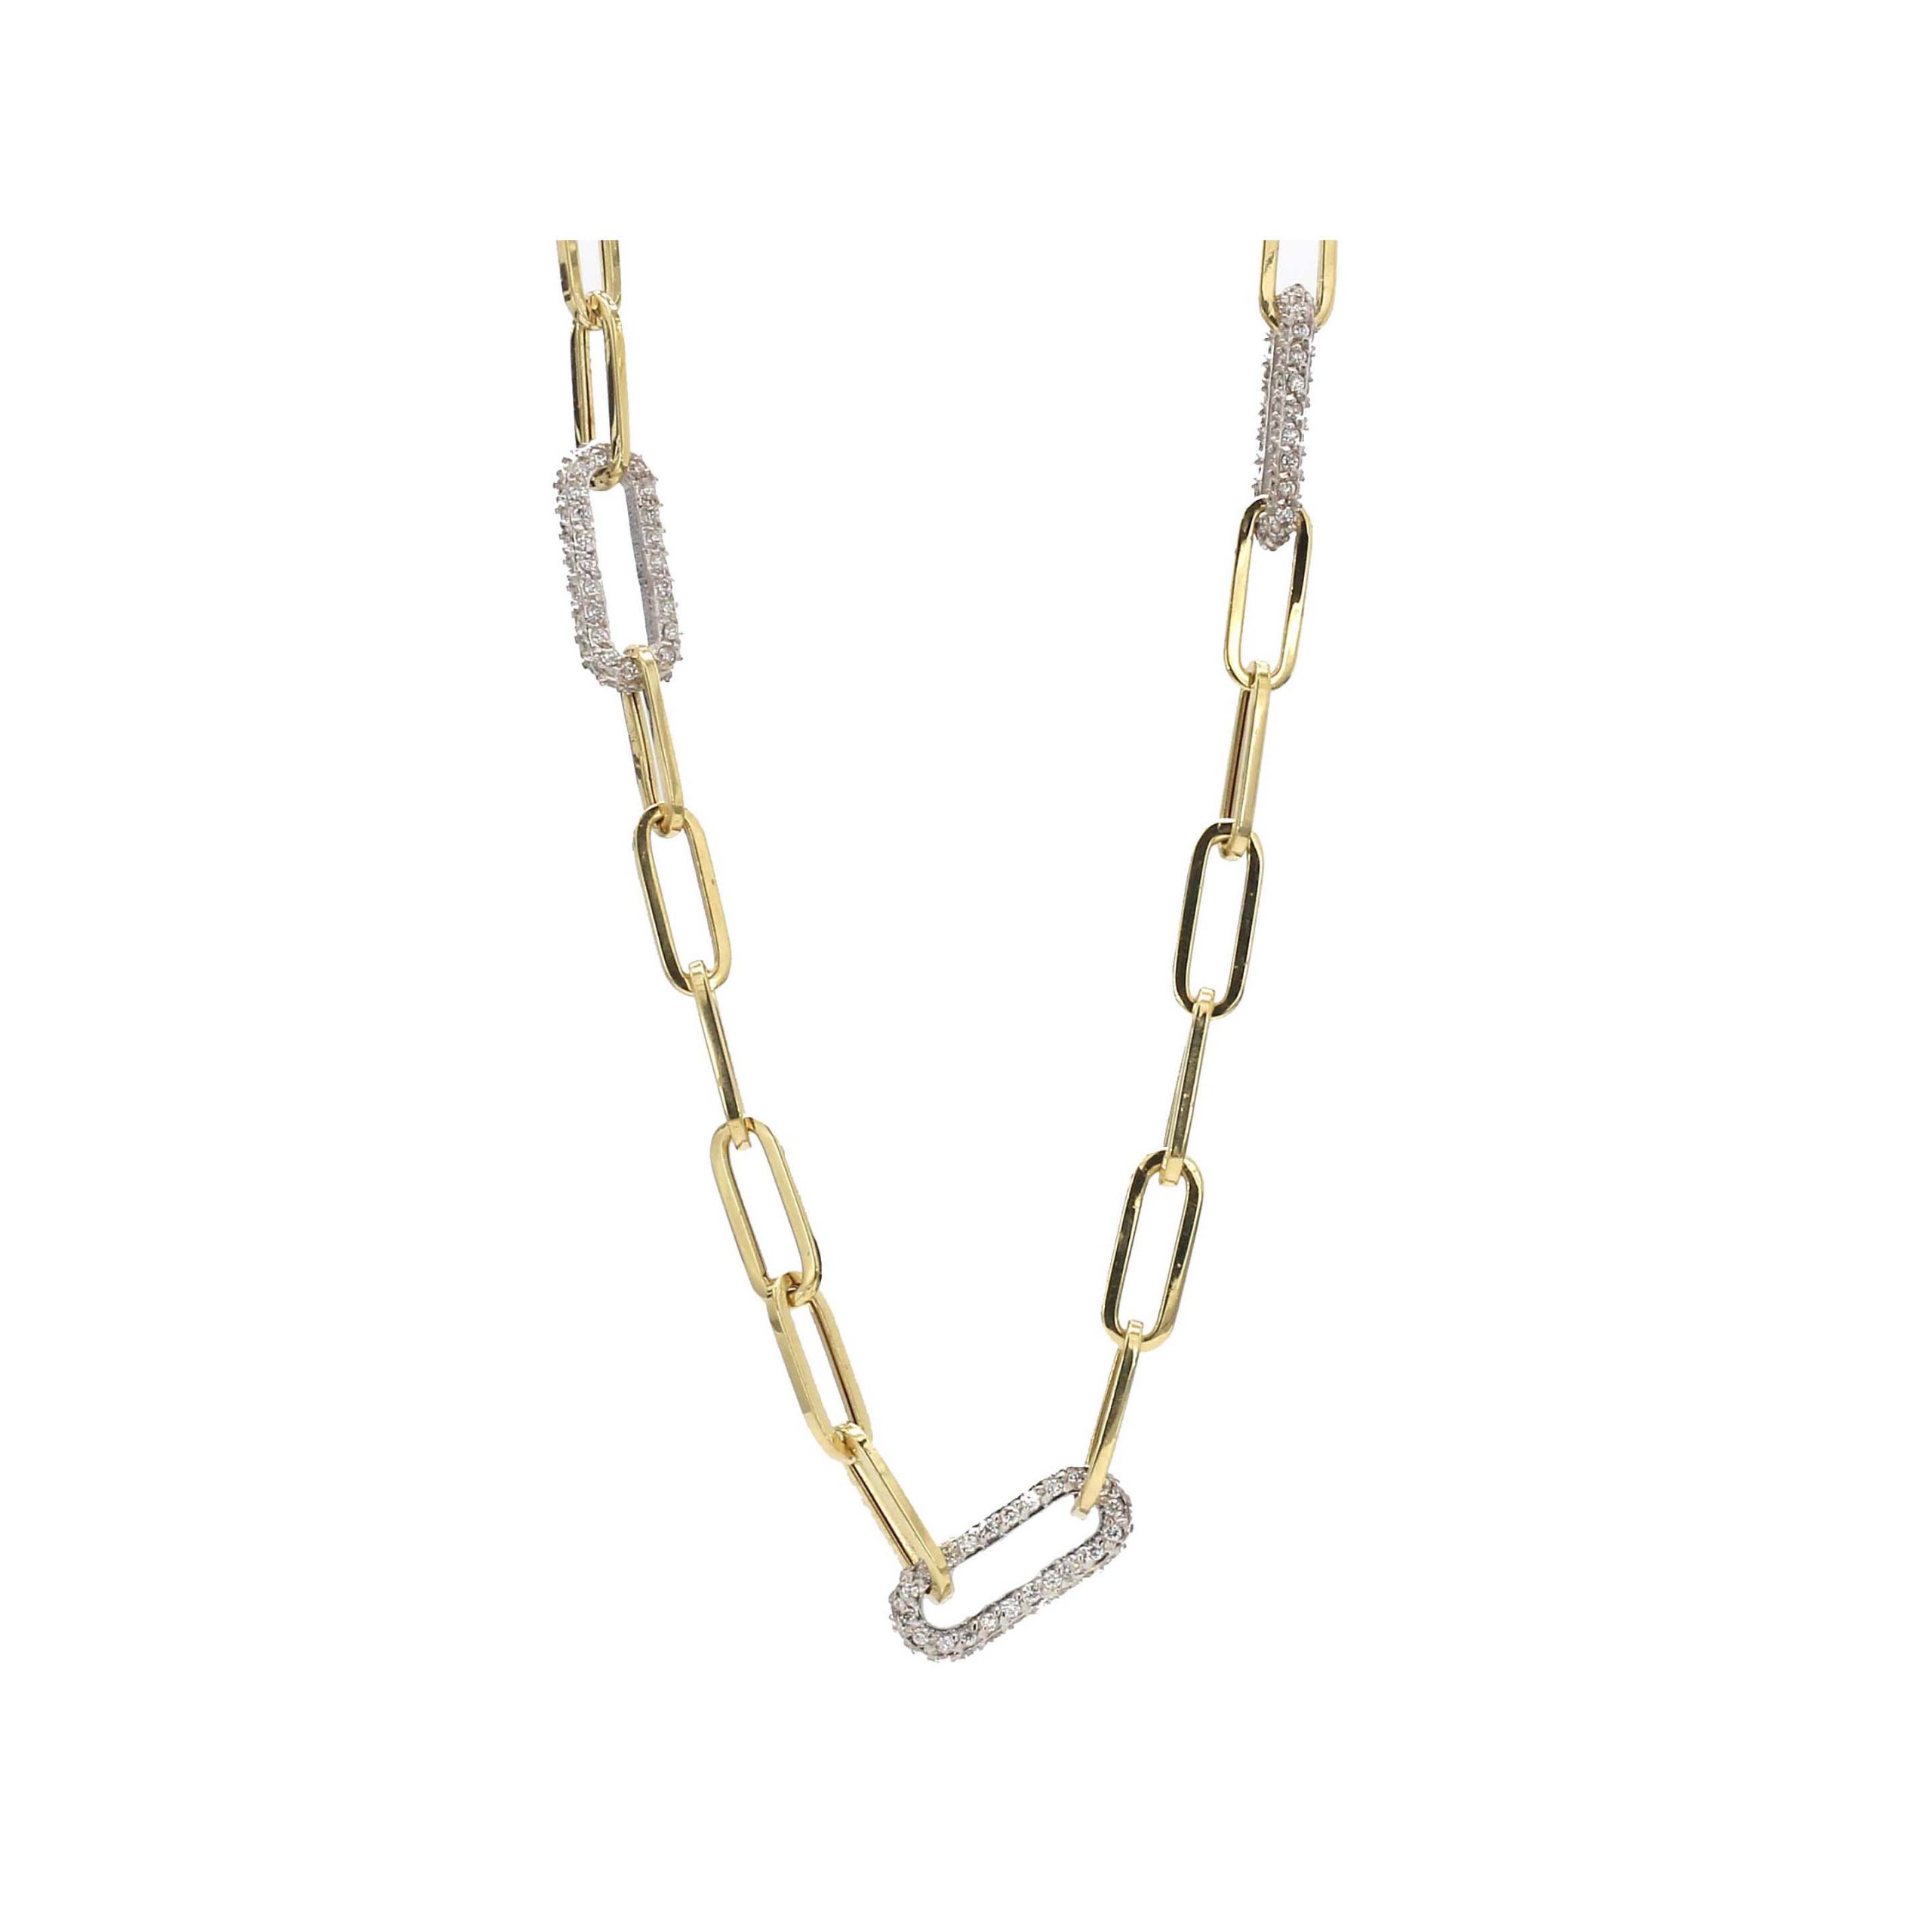 Paperclip Chain Necklace with 3 Diamond Pavé Links | Marisa Perry